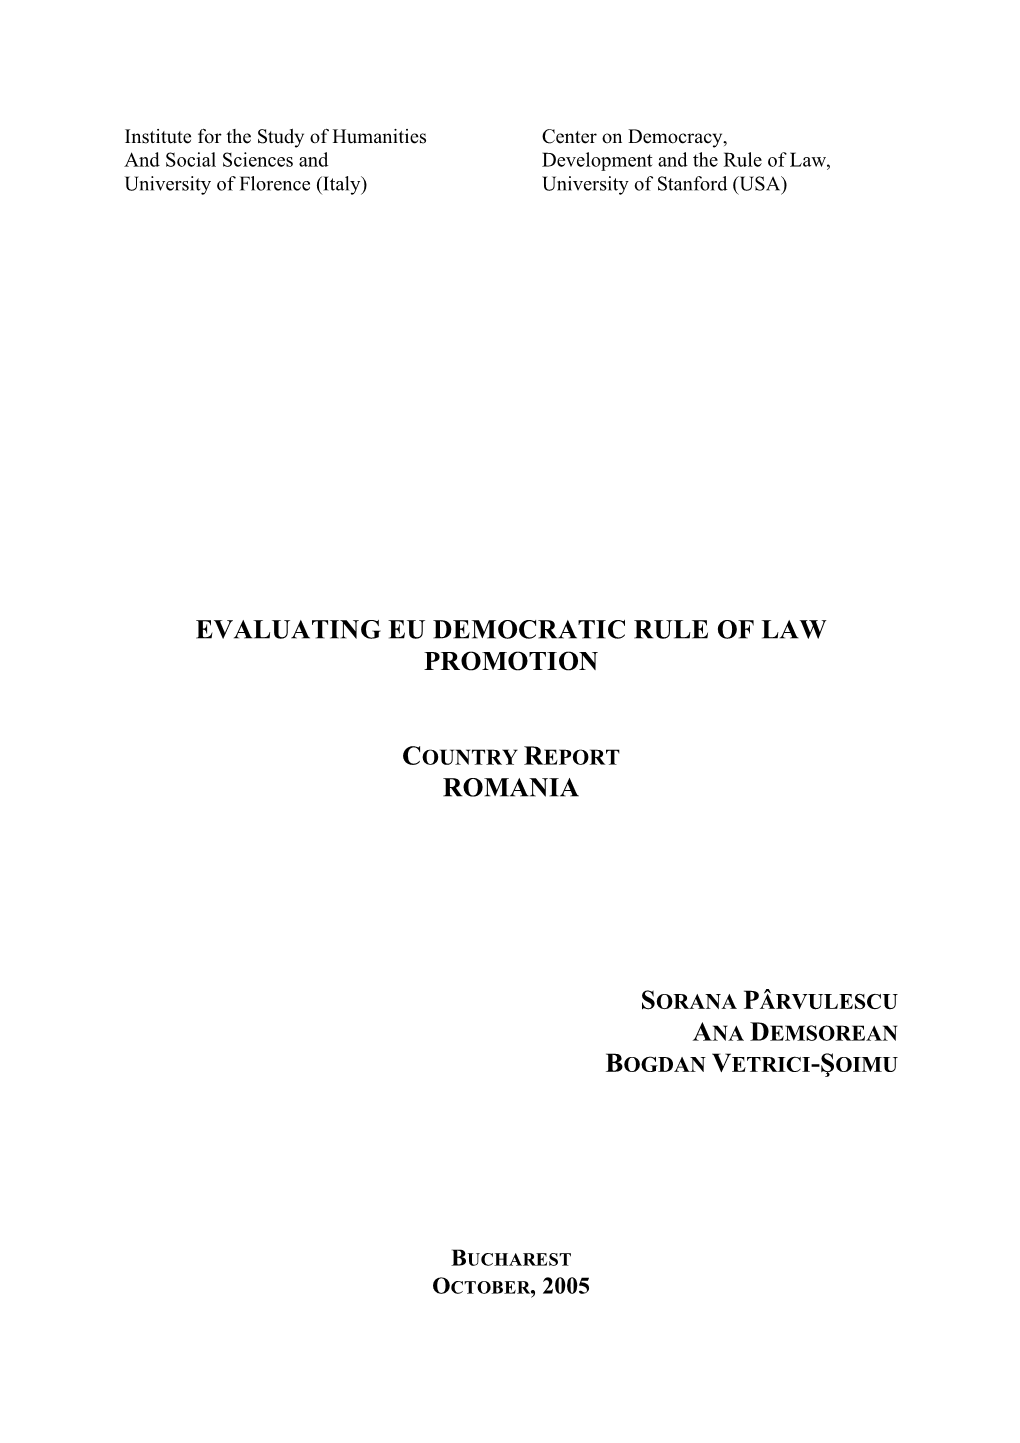 Evaluating Eu Democratic Rule of Law Promotion